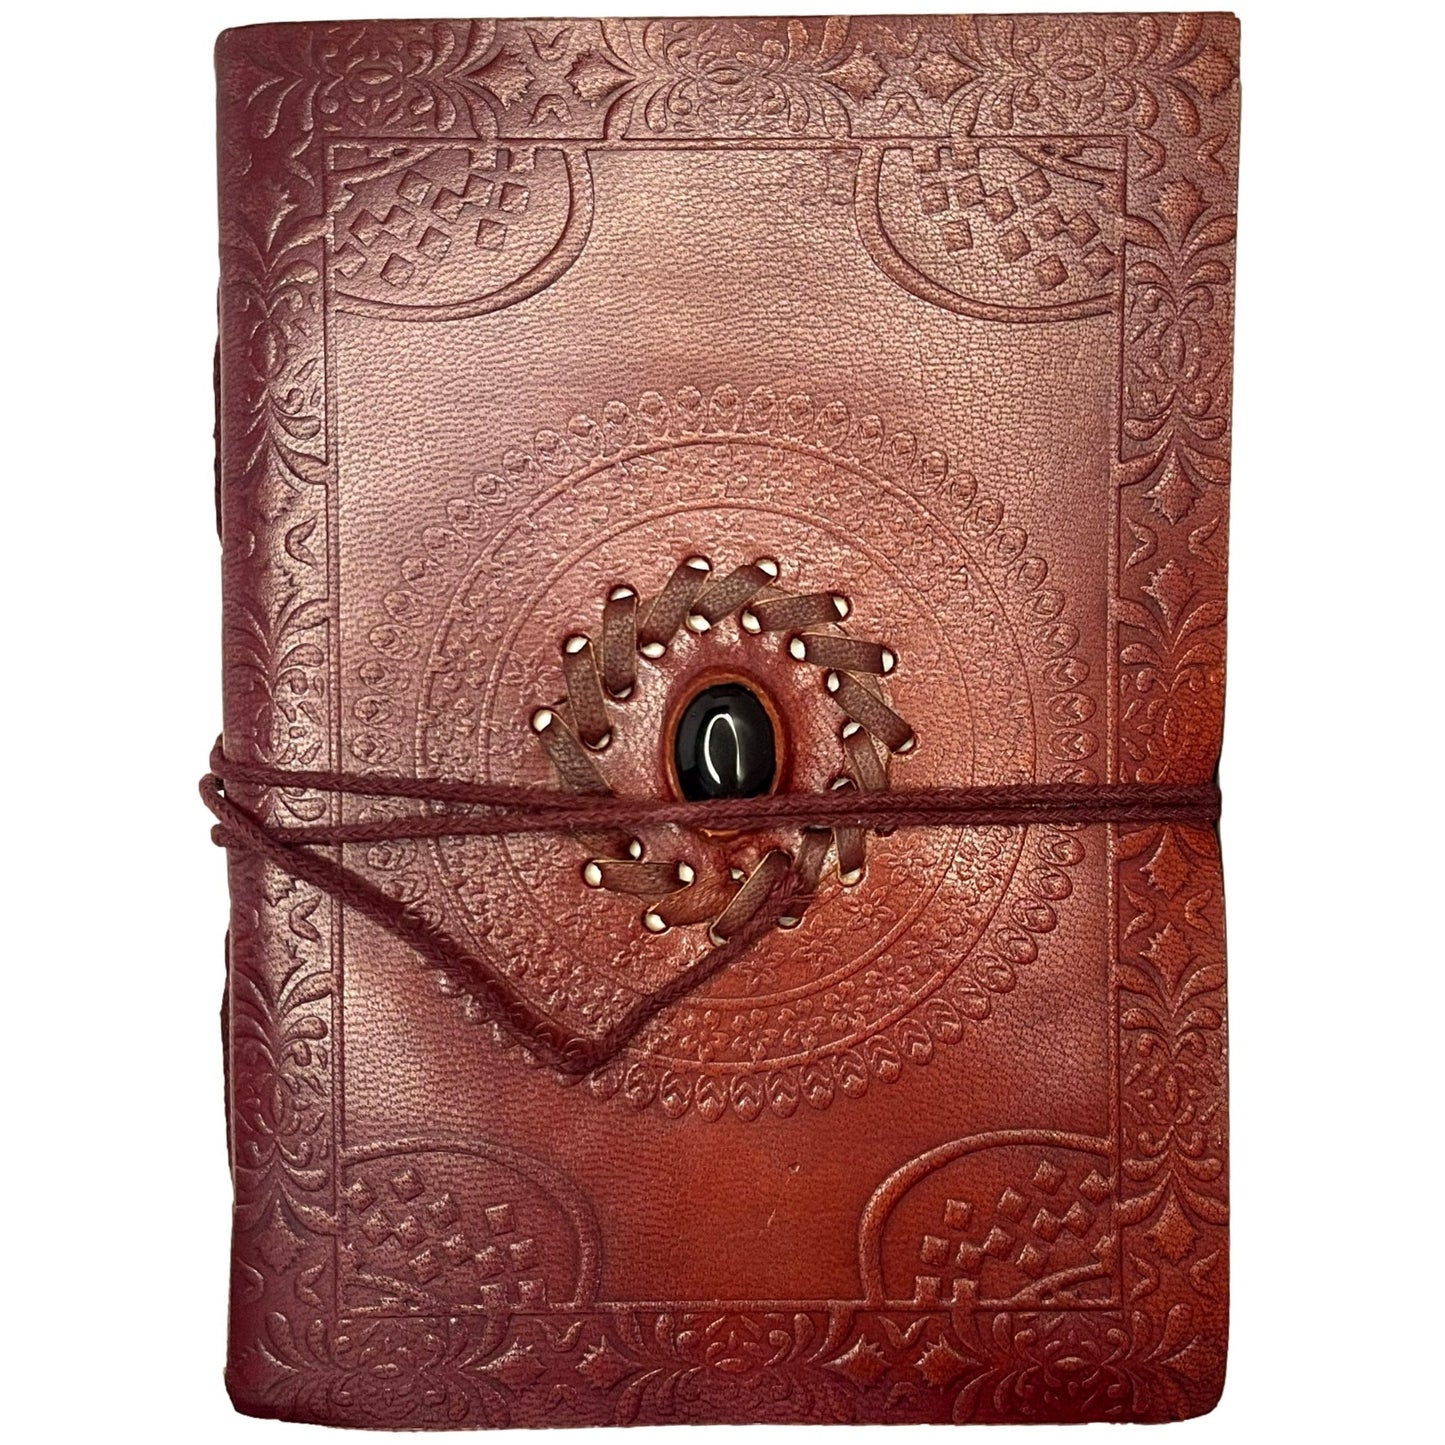 100% Leather Journal with Embossed Gemstone, Malachite, Carnelian, Onyx, or Turquoise